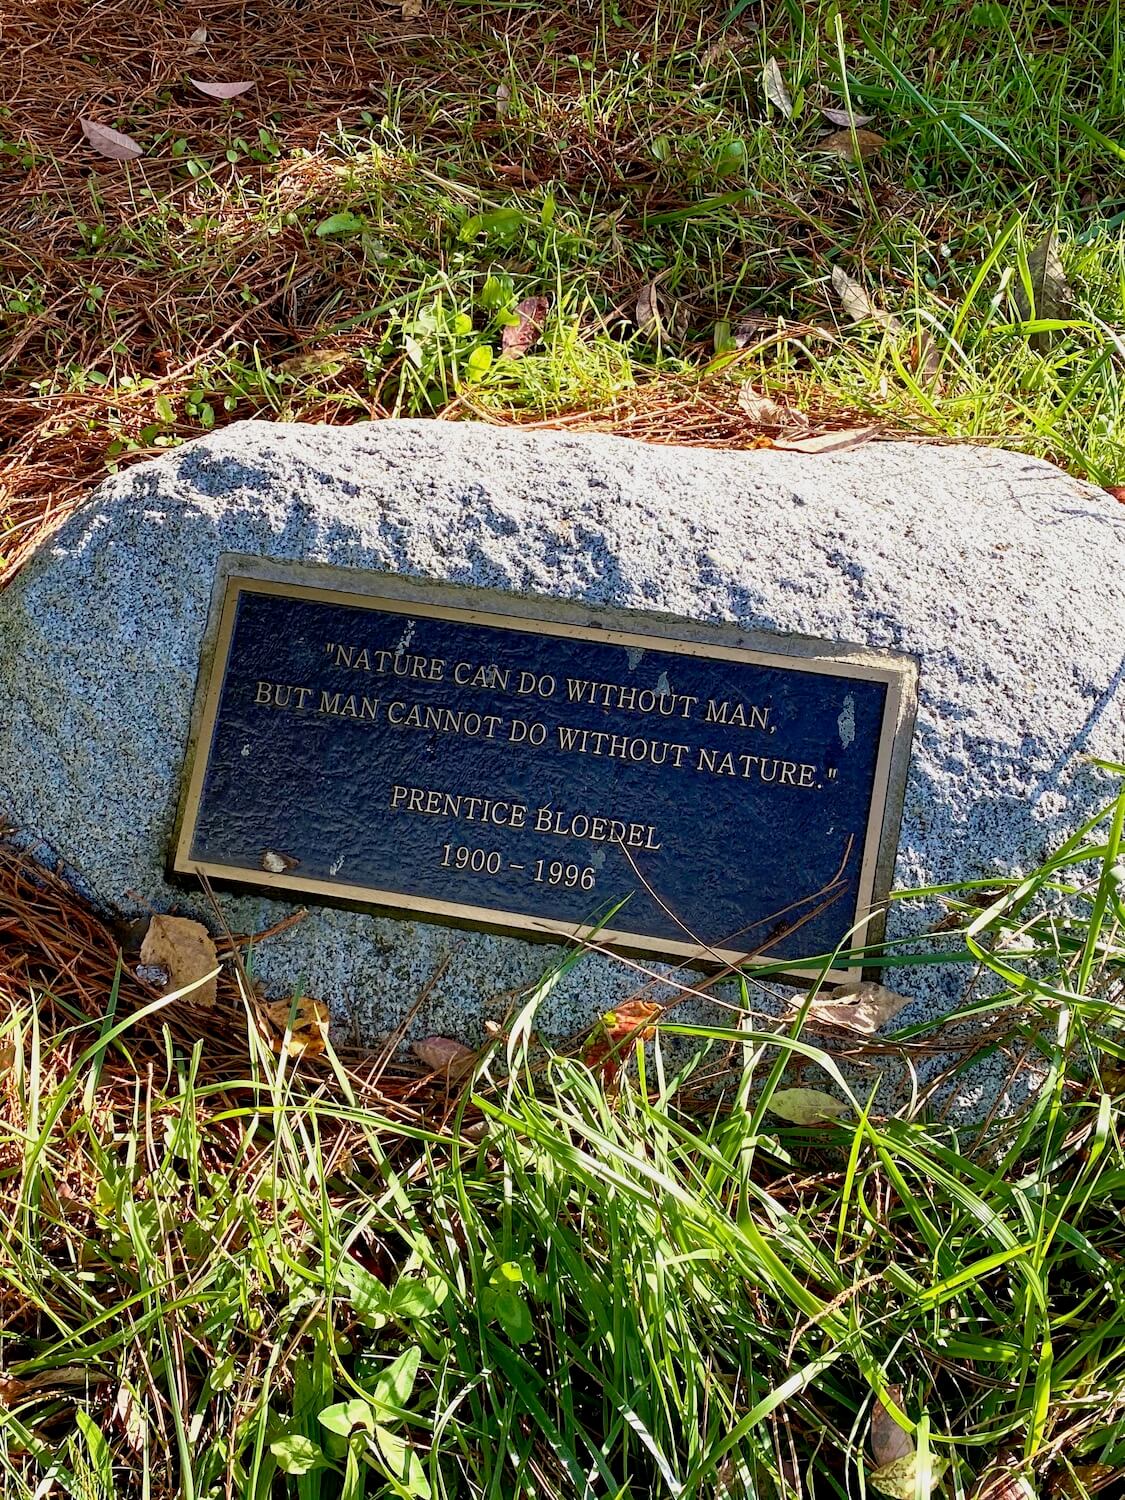 A rock with a black placard with bronze trim and writing says, "Nature can do without man, but man cannot do without nature." This is a memorialized quote from the former owner Prentice Bloedel. This placard is attached to a large stone that sits amongst green grass and pine needles at the beginning of a trail at Bloedel Reserve on Bainbridge Island.